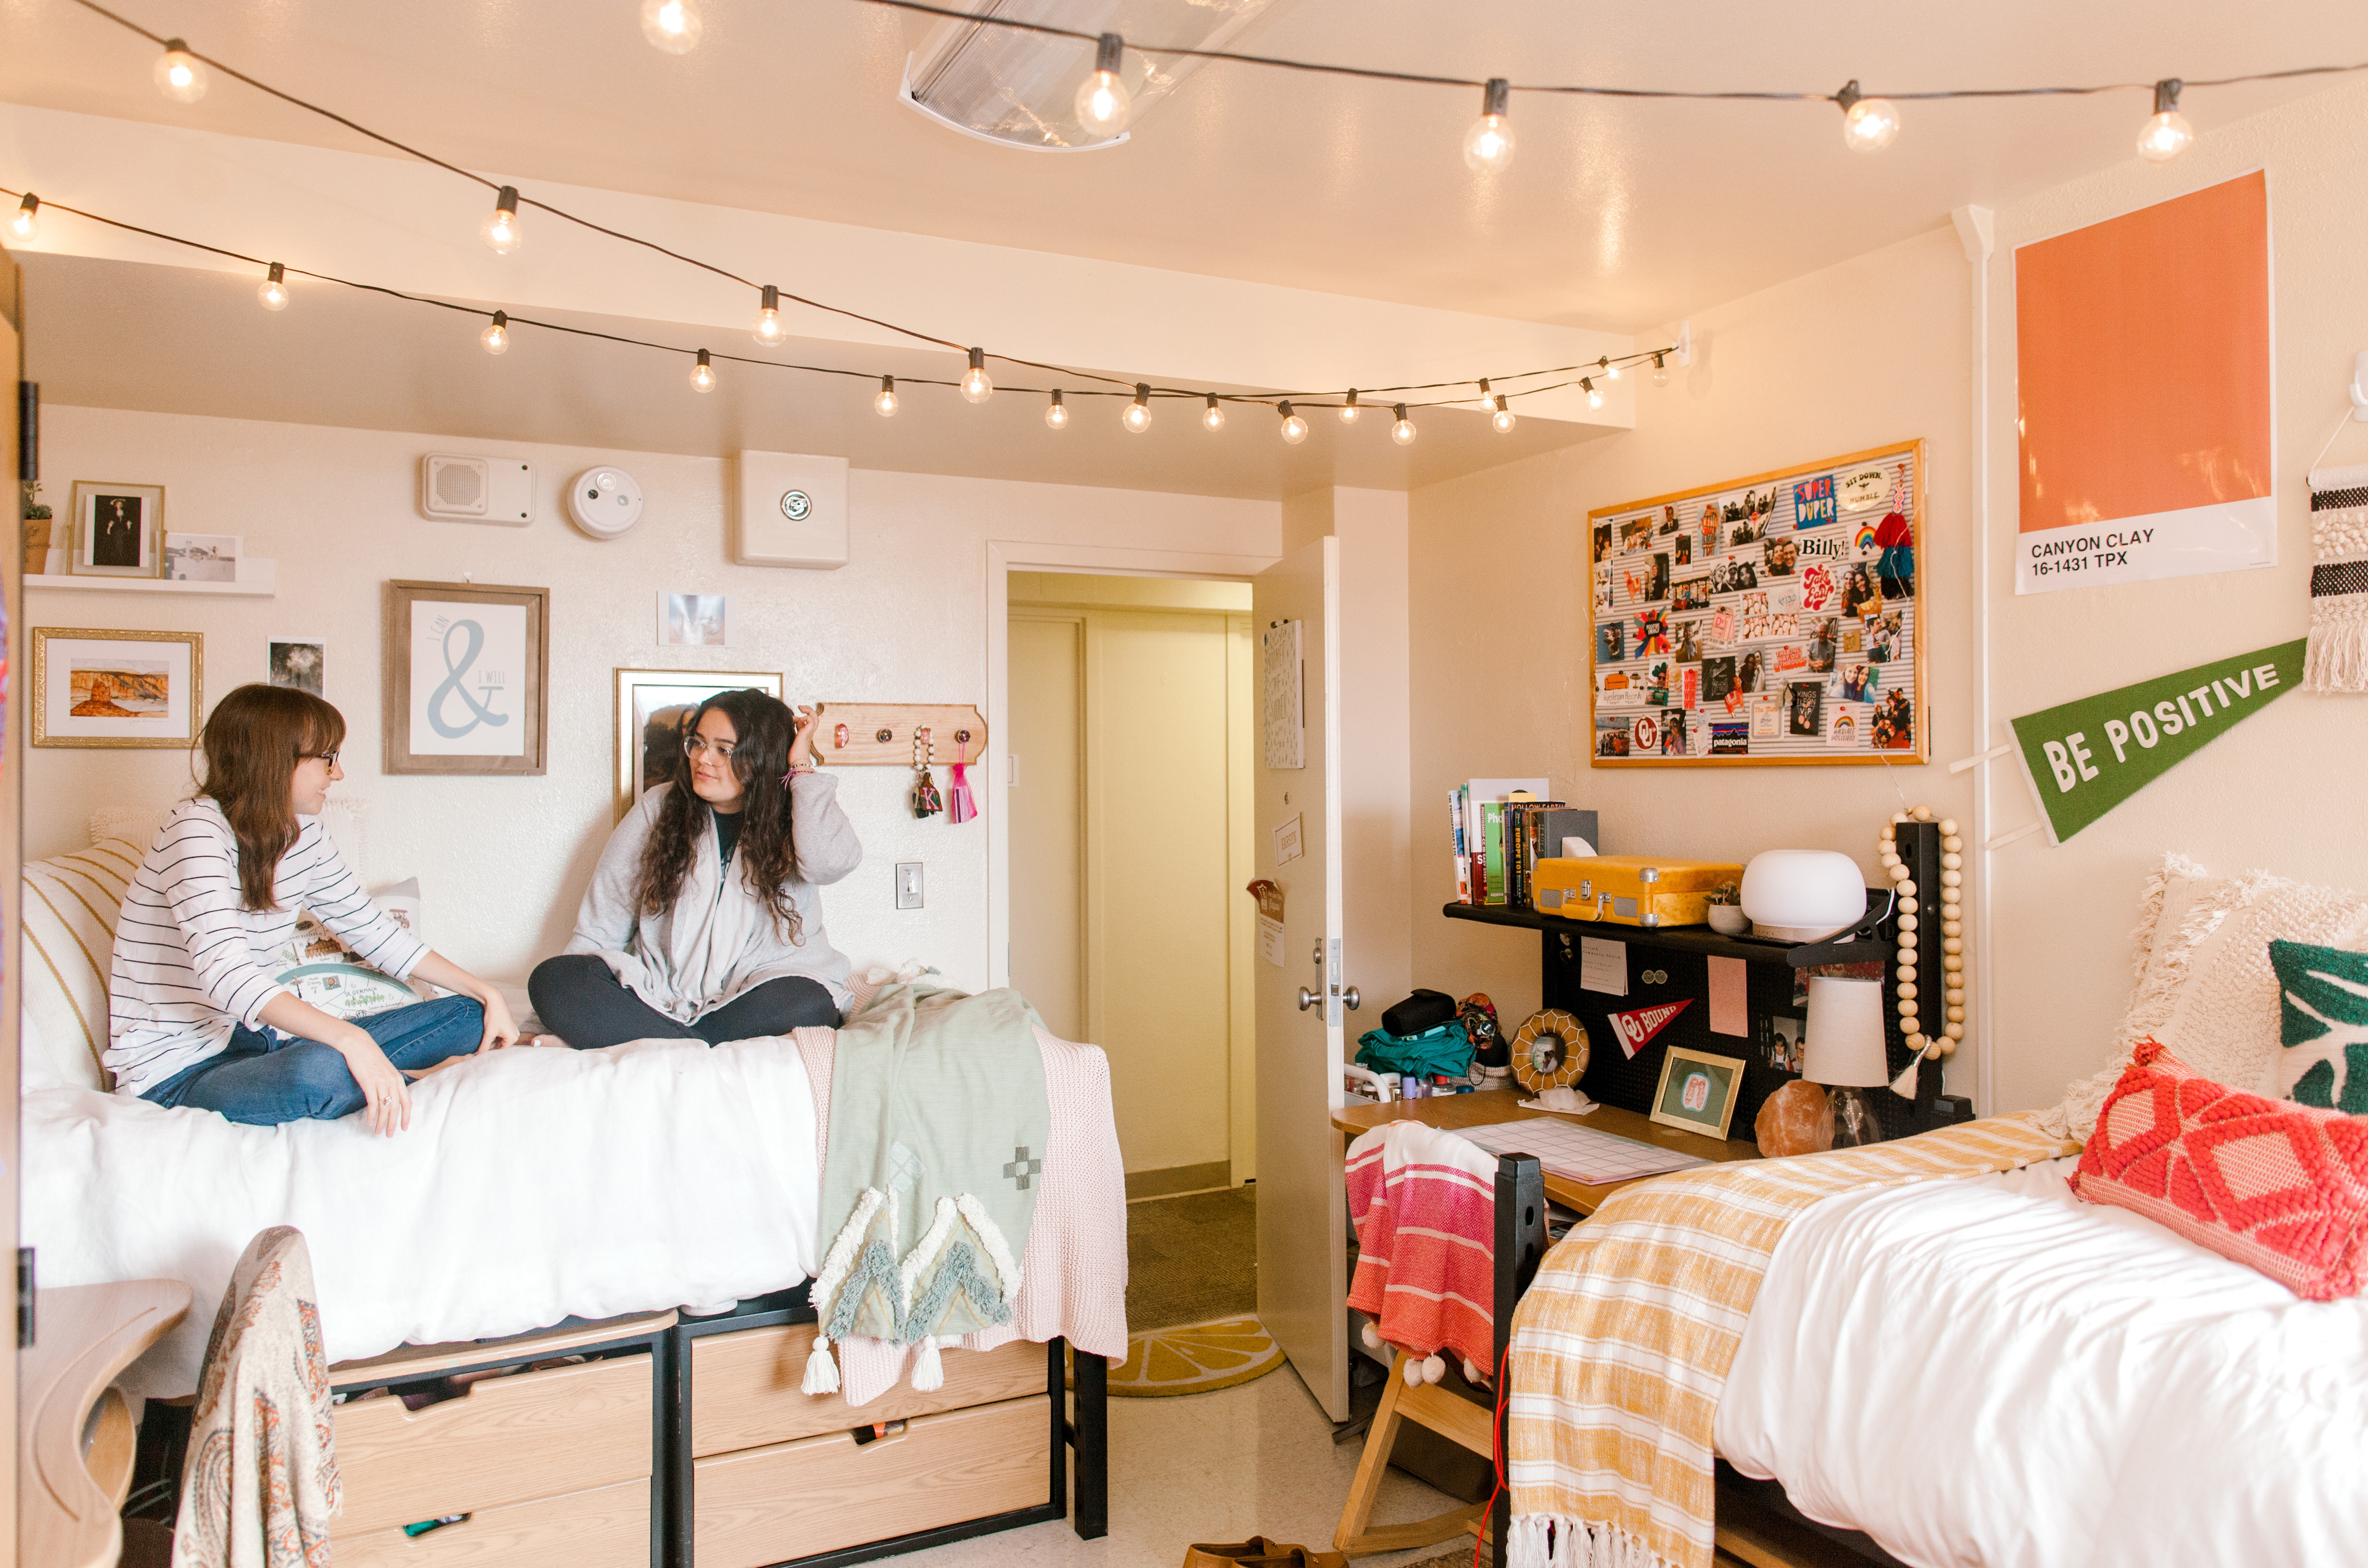 students in residence hall sitting on bed